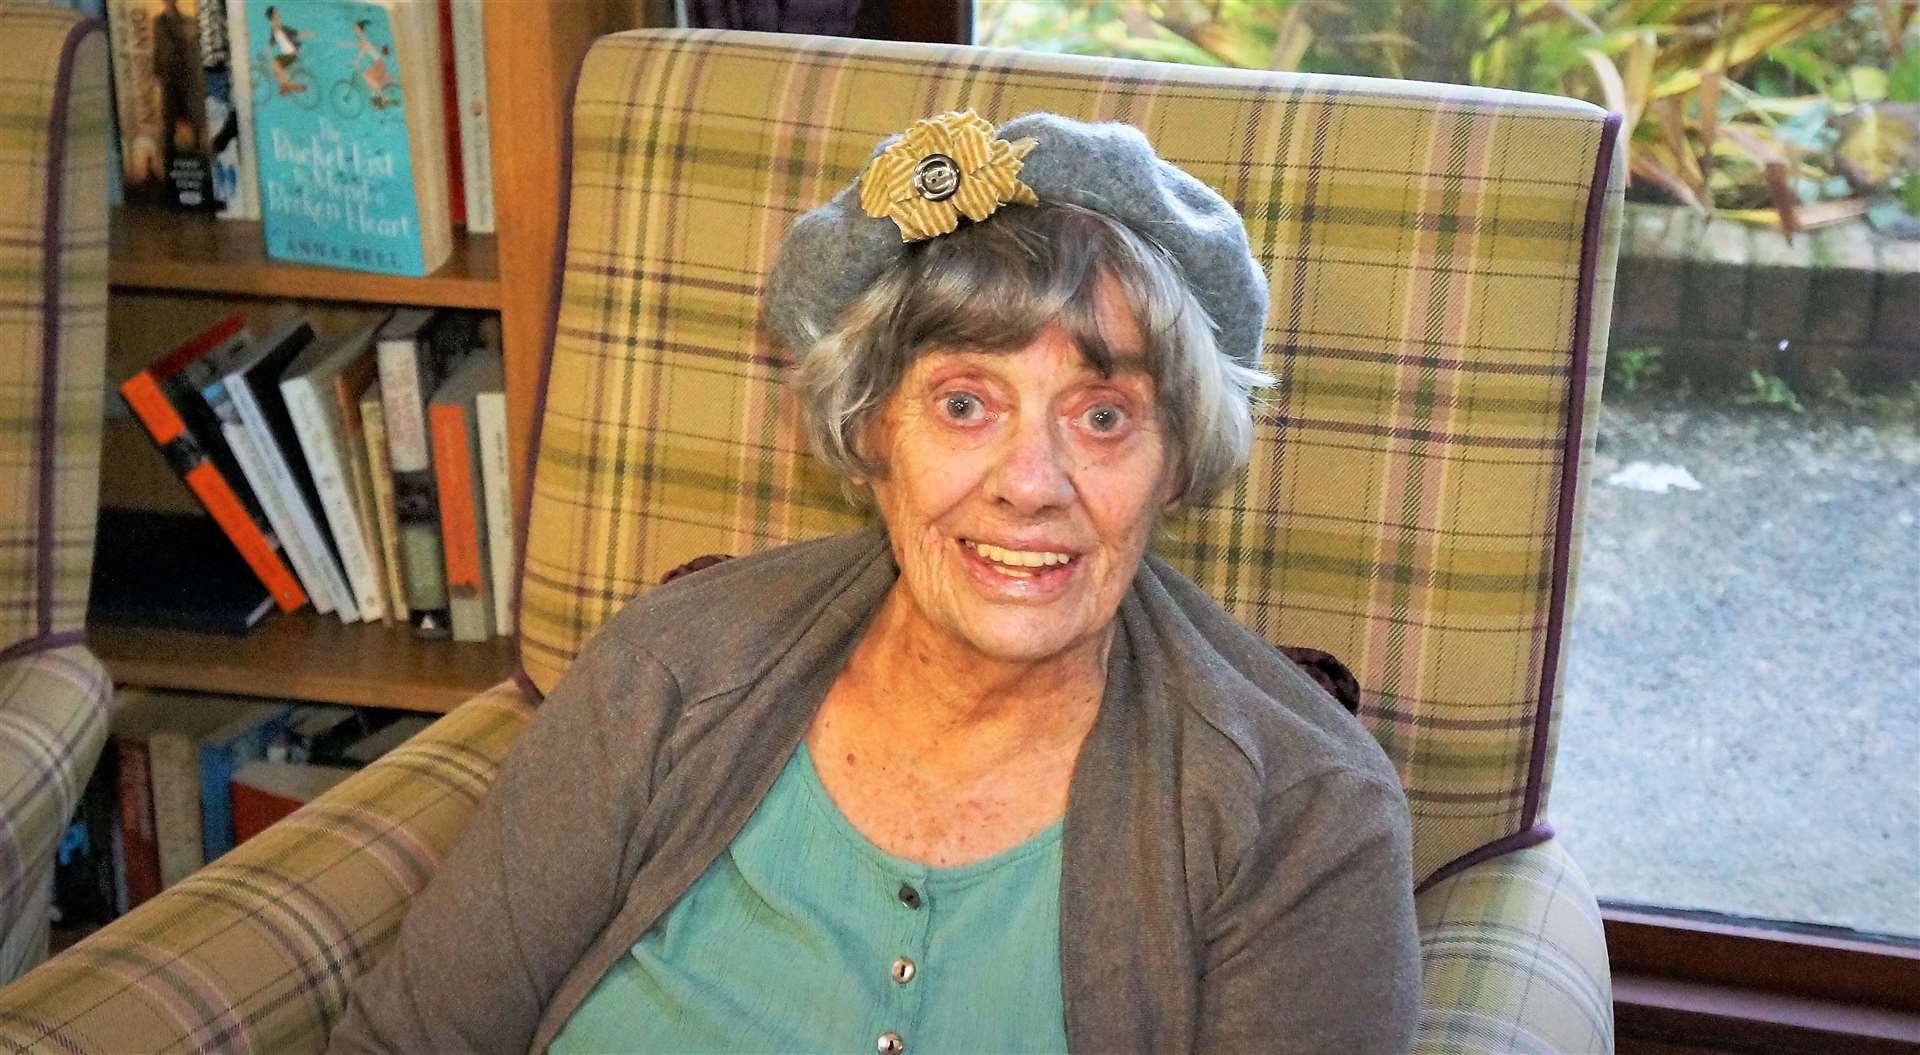 The late Joan Powell at the Pentland View care home where she exhibited some of her work in a mixed exhibition in November 2019. Photo: DGS